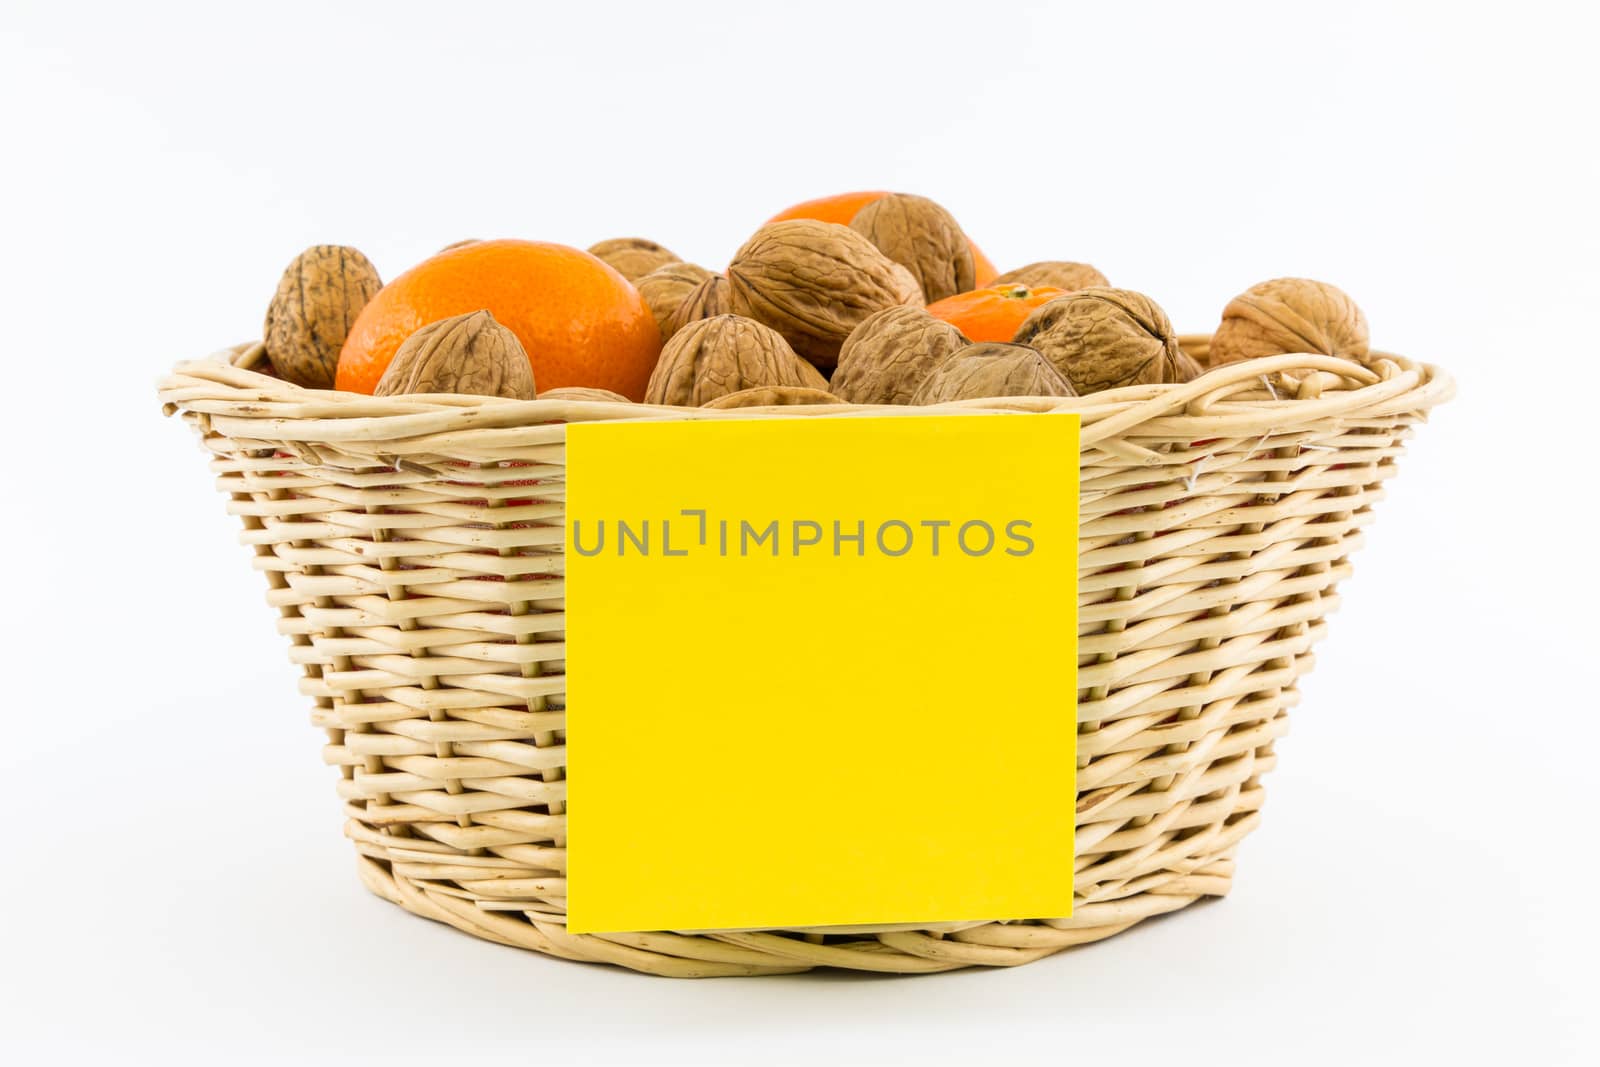 Small basket with walnuts and tangerines, yelllow sticky note